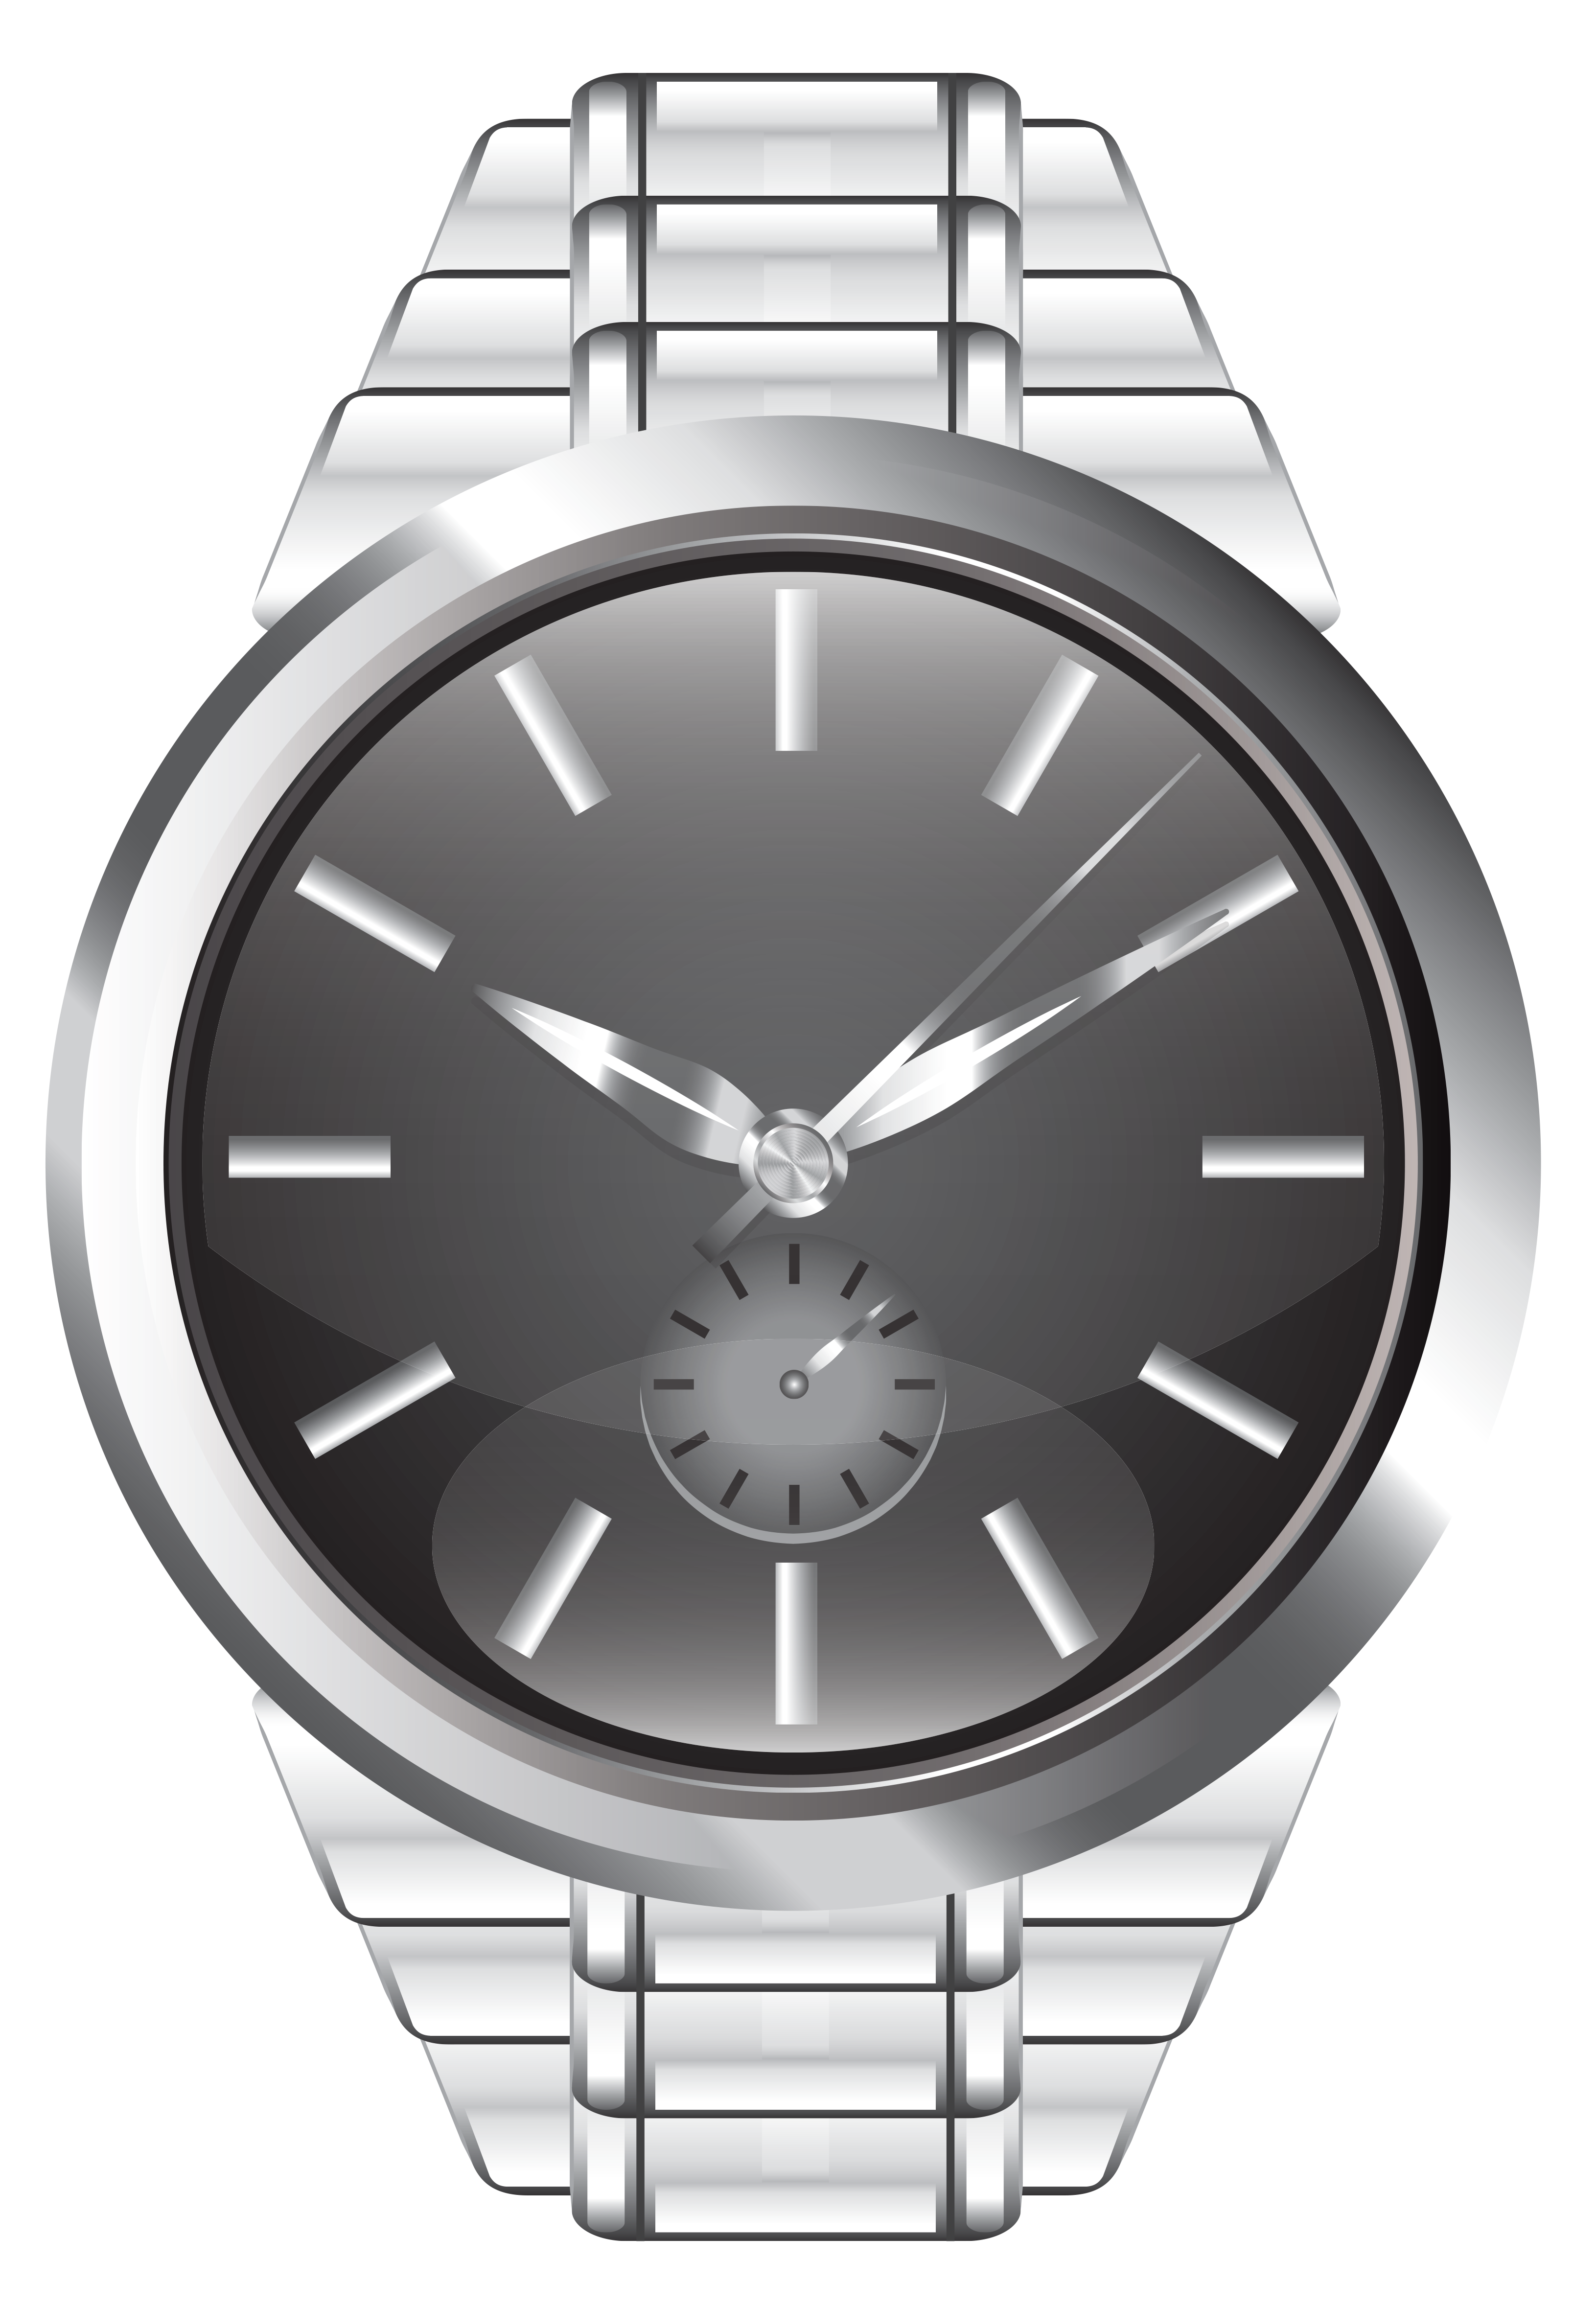 wrist watch clipart black and white - photo #26